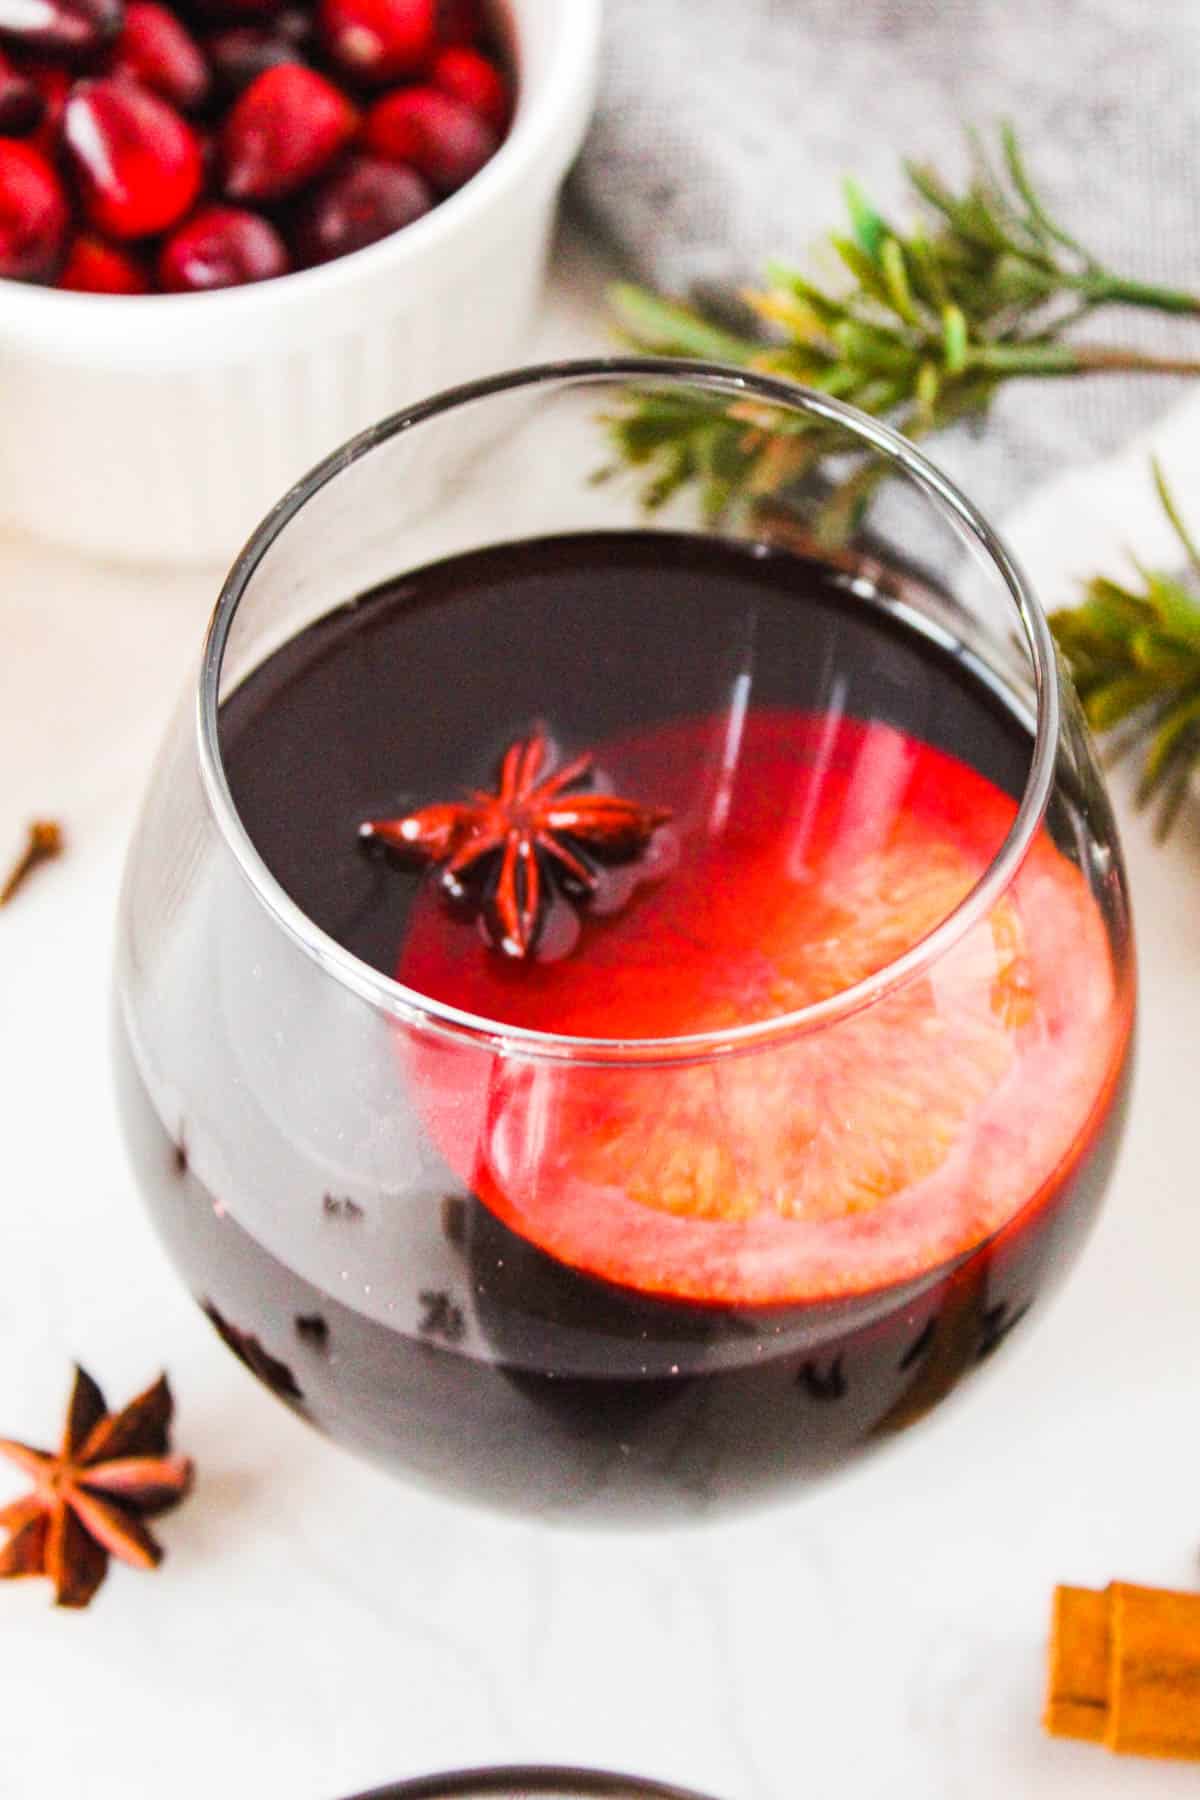 Glass of spiced wine on a white background surrounded by garnishes.